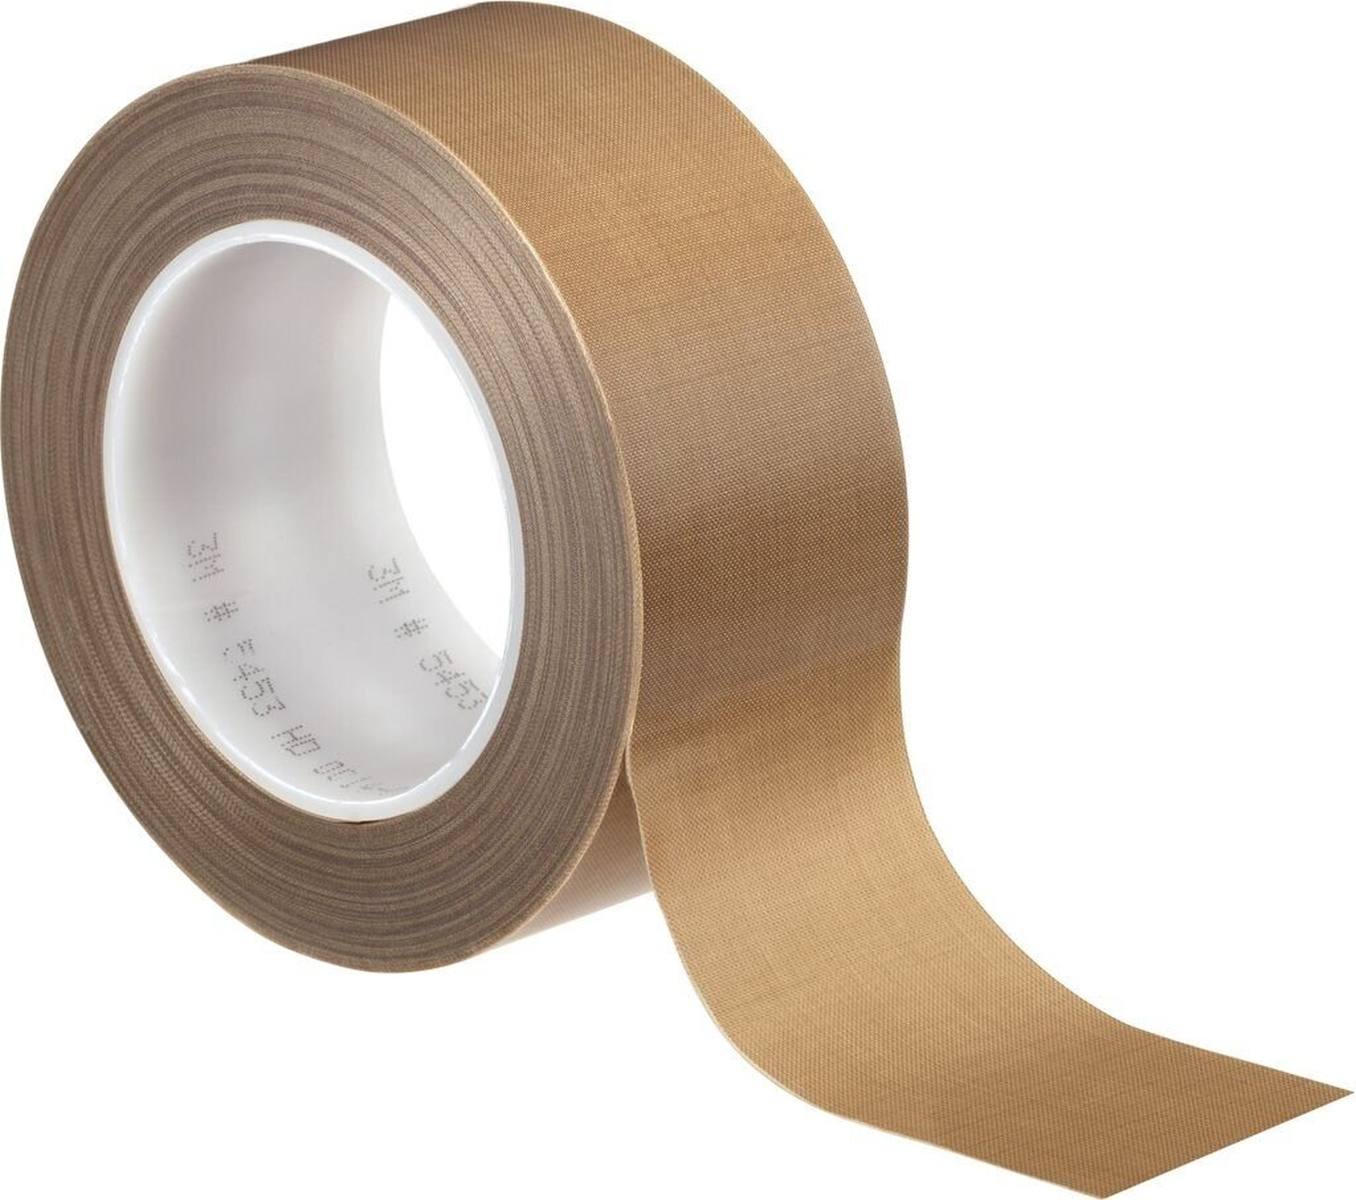 3M 5453 PTFE glass adhesive tape 9mmx33m, 0.22mm, silicone